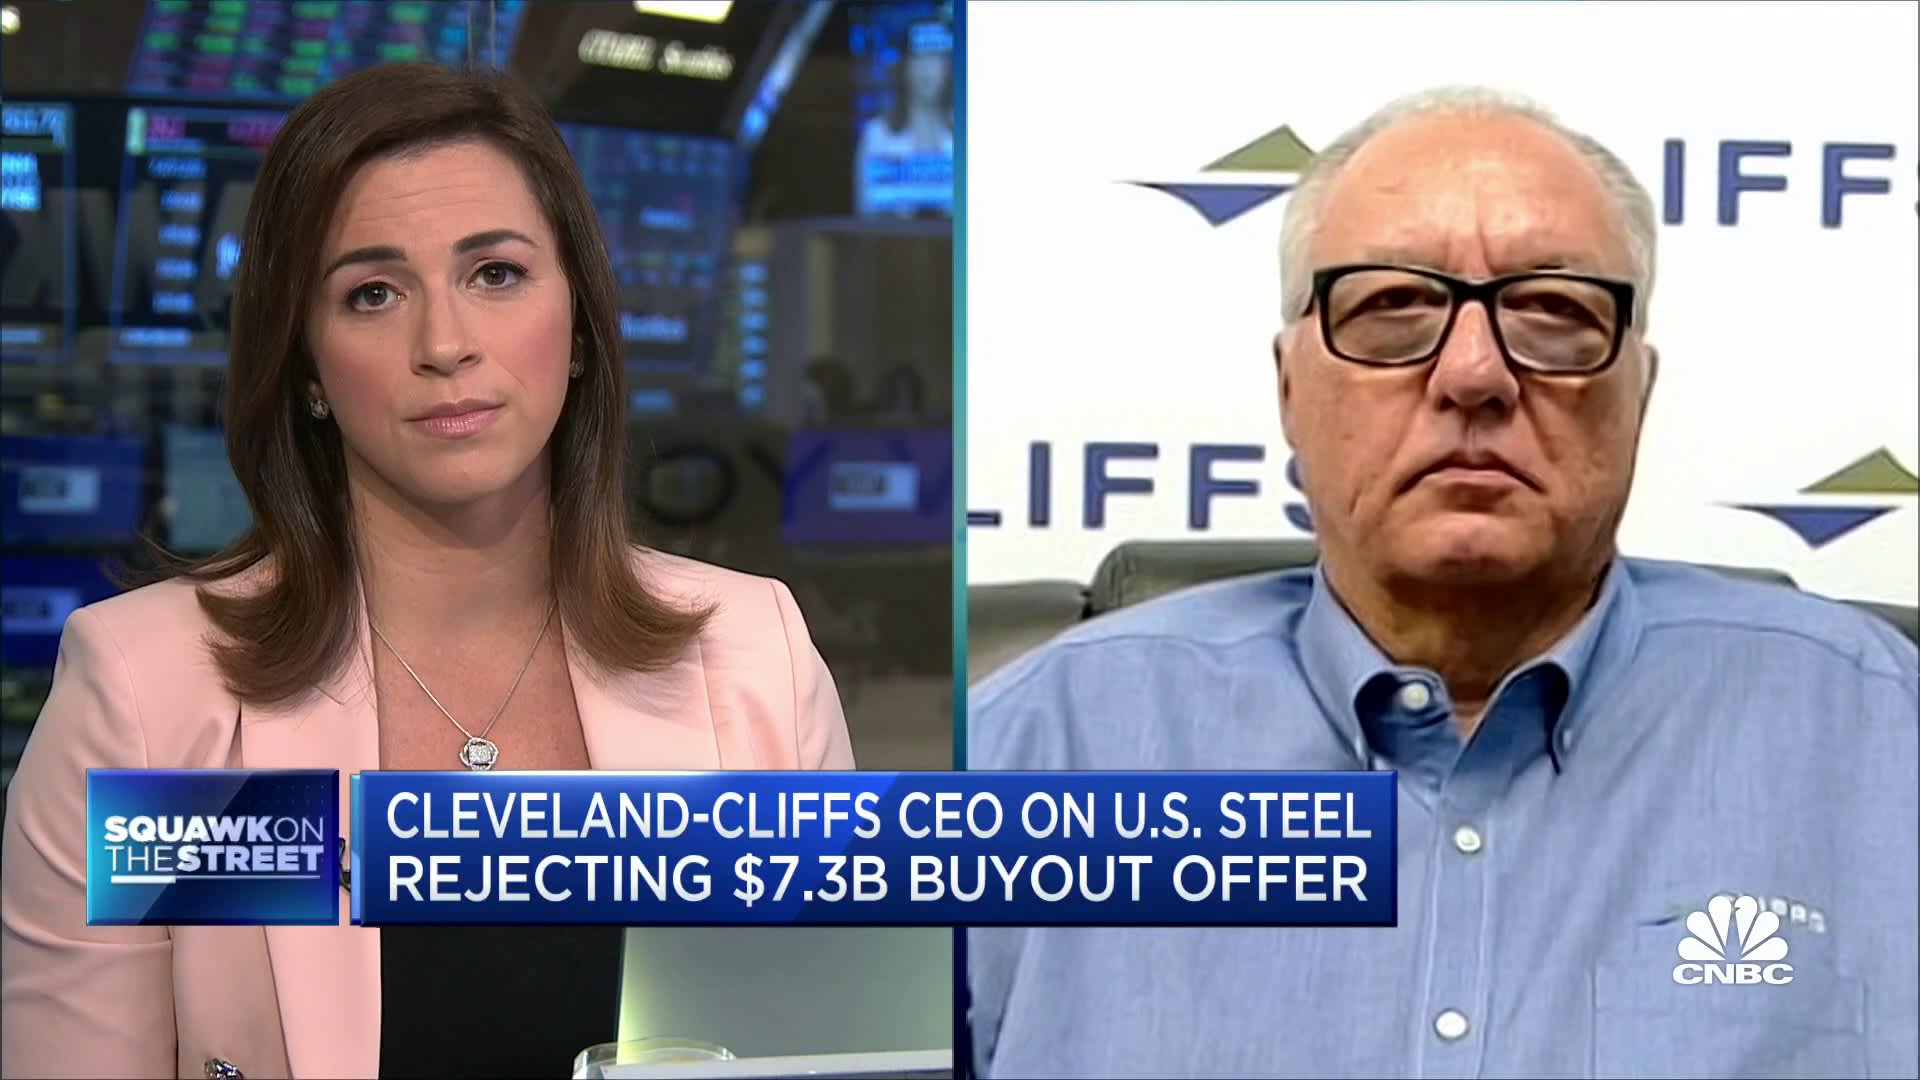 U.S. Steel rejects a $7.3 billion offer from rival Cleveland-Cliffs; considers alternatives